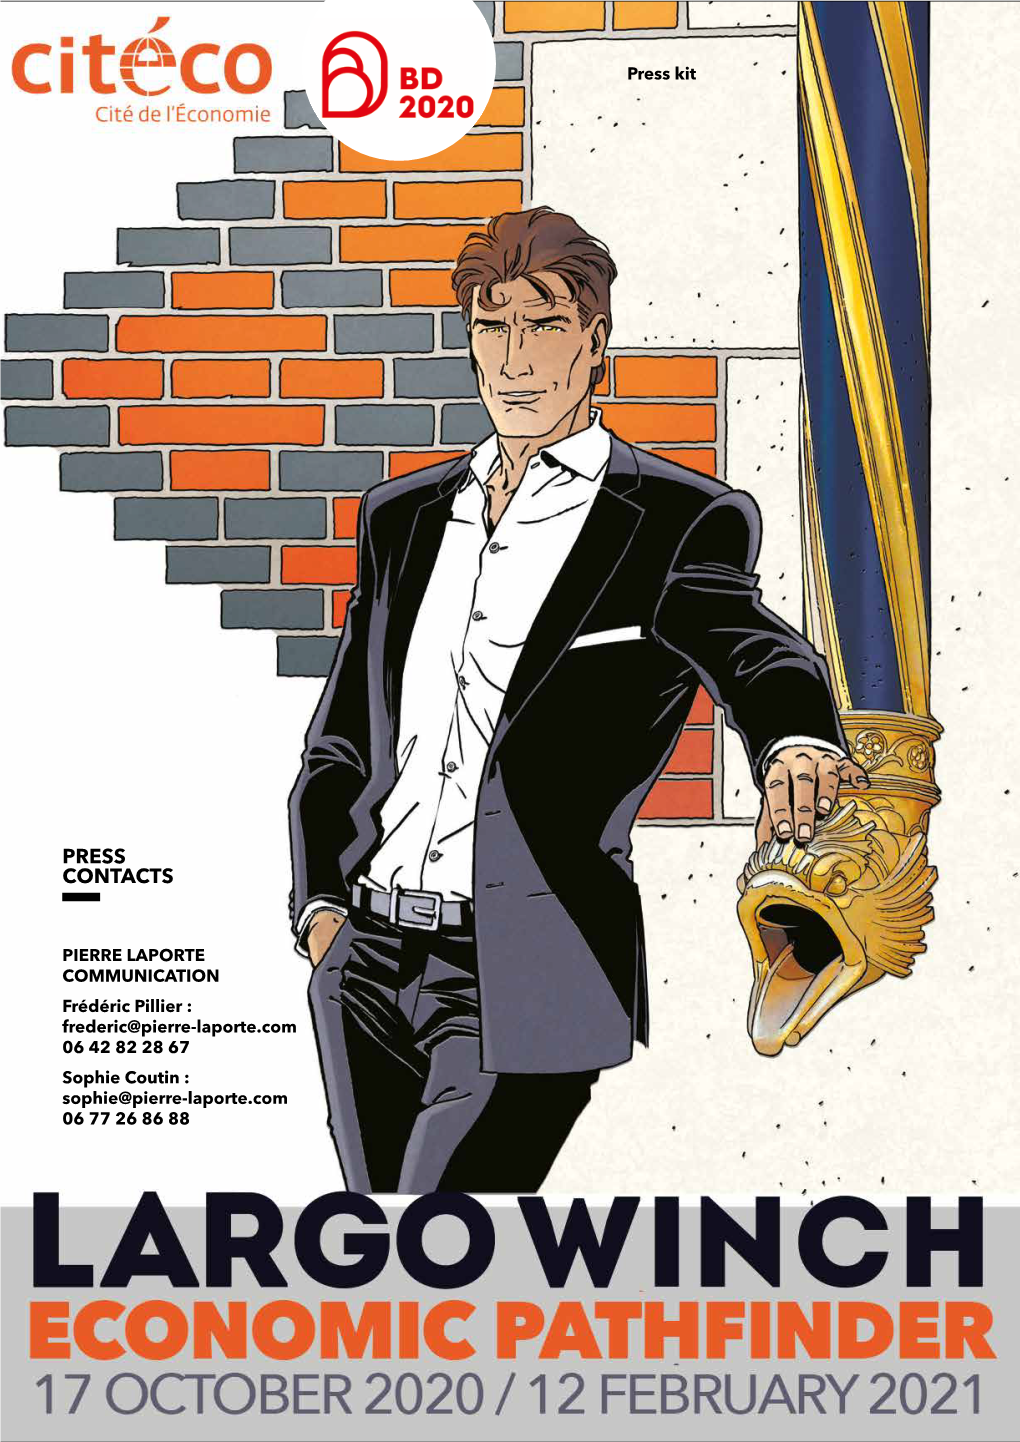 Who Is Largo Winch?